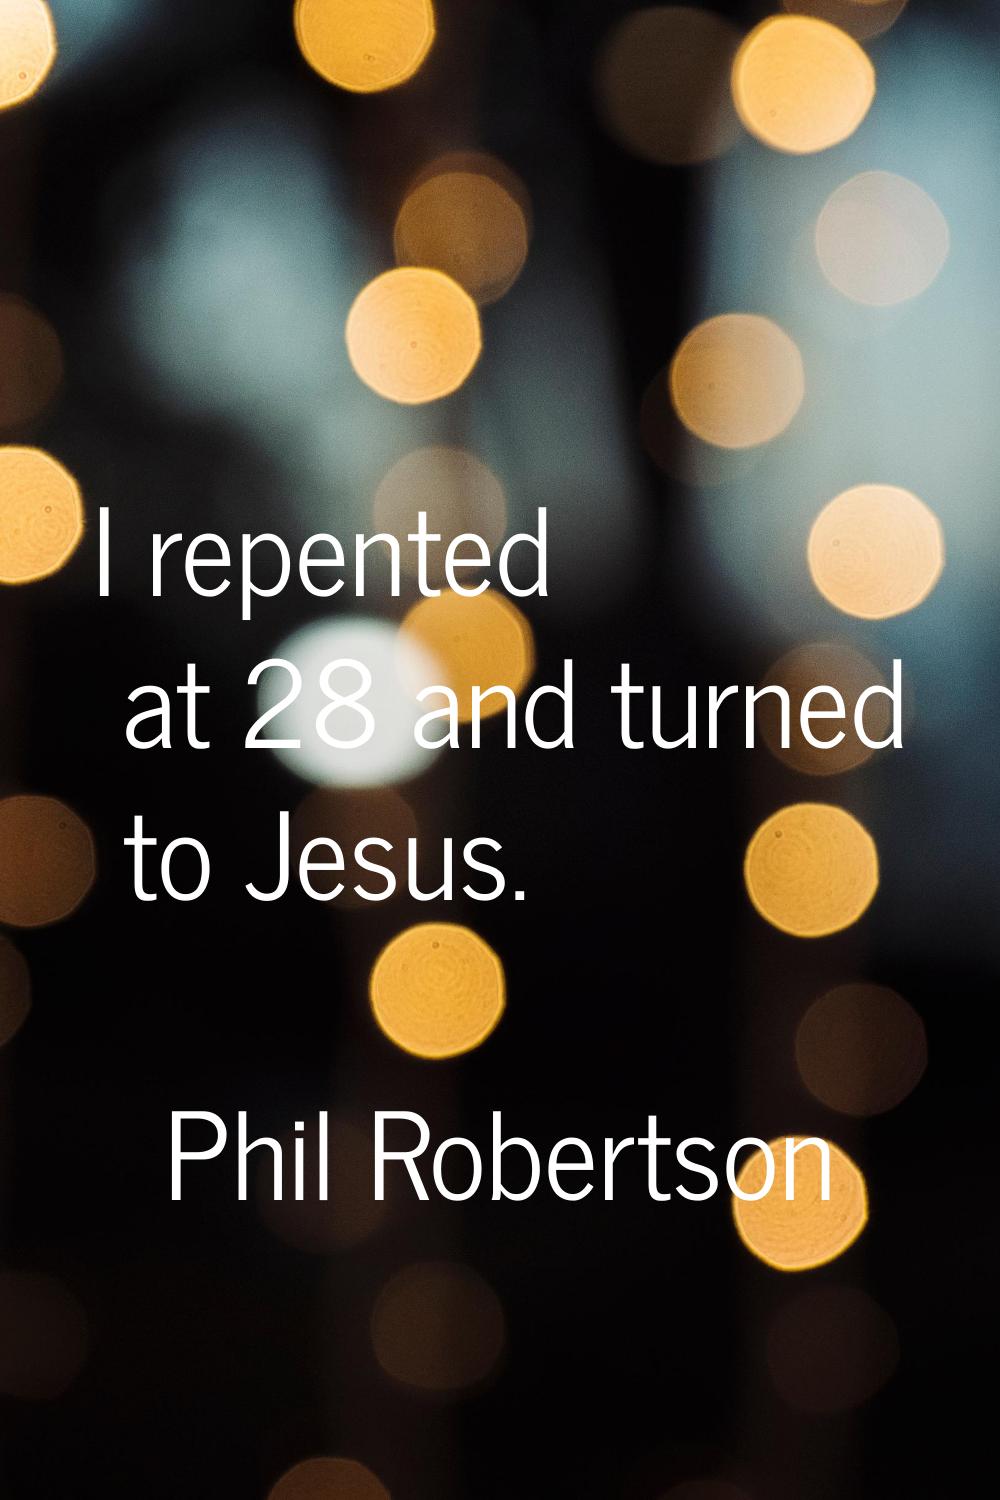 I repented at 28 and turned to Jesus.